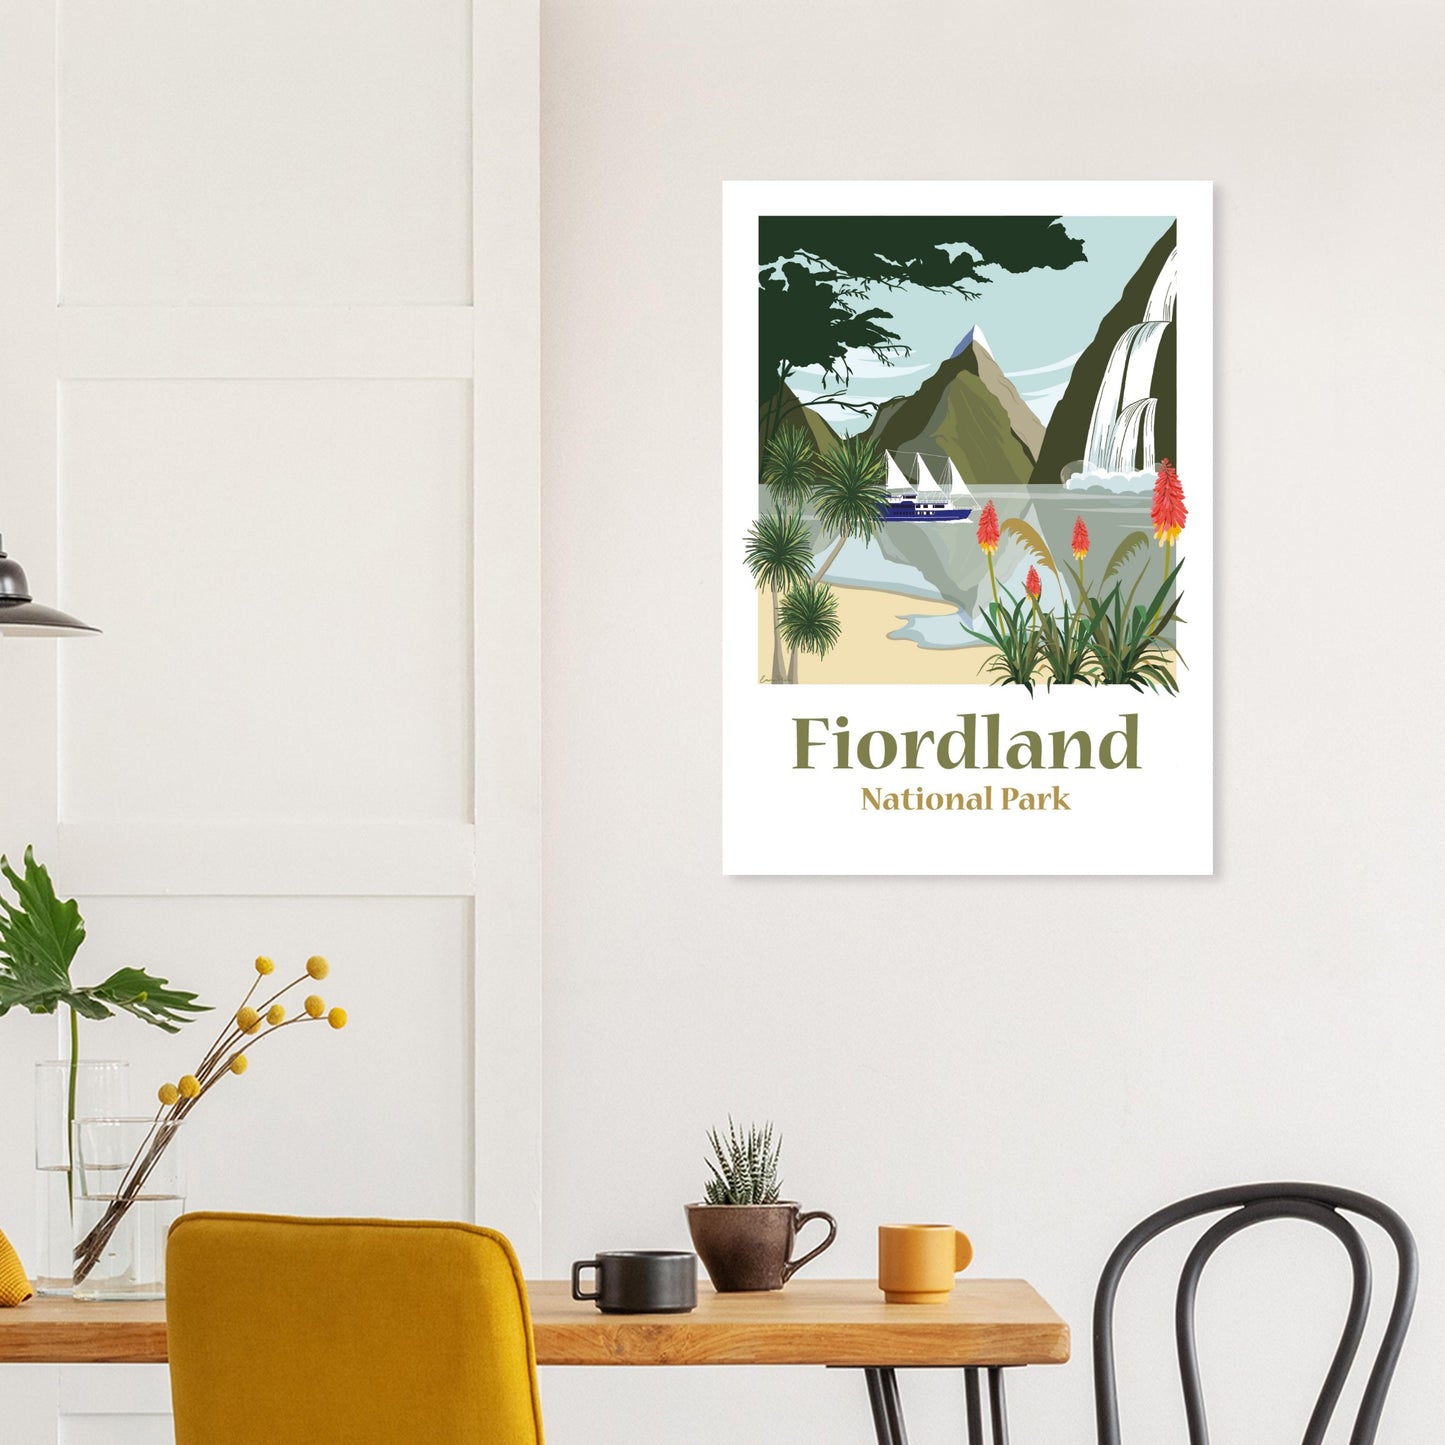 A1 Travel Poster of Milford Sound, Doubtful Sound and Fiordland